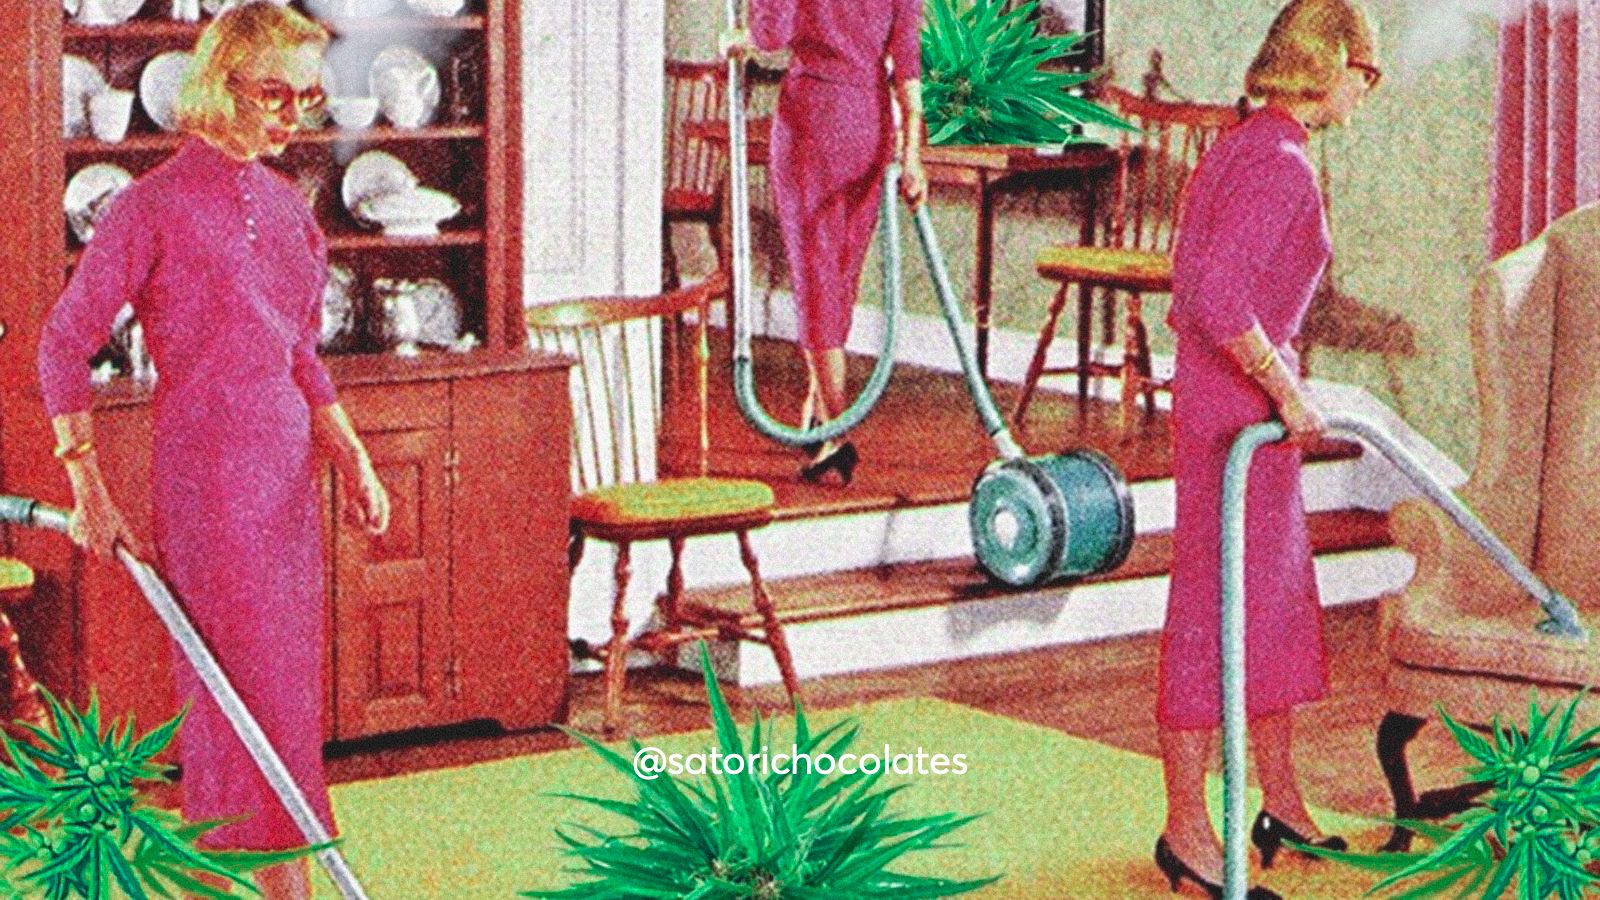 A woman vacuums around her house that has become messy with cannabis plants